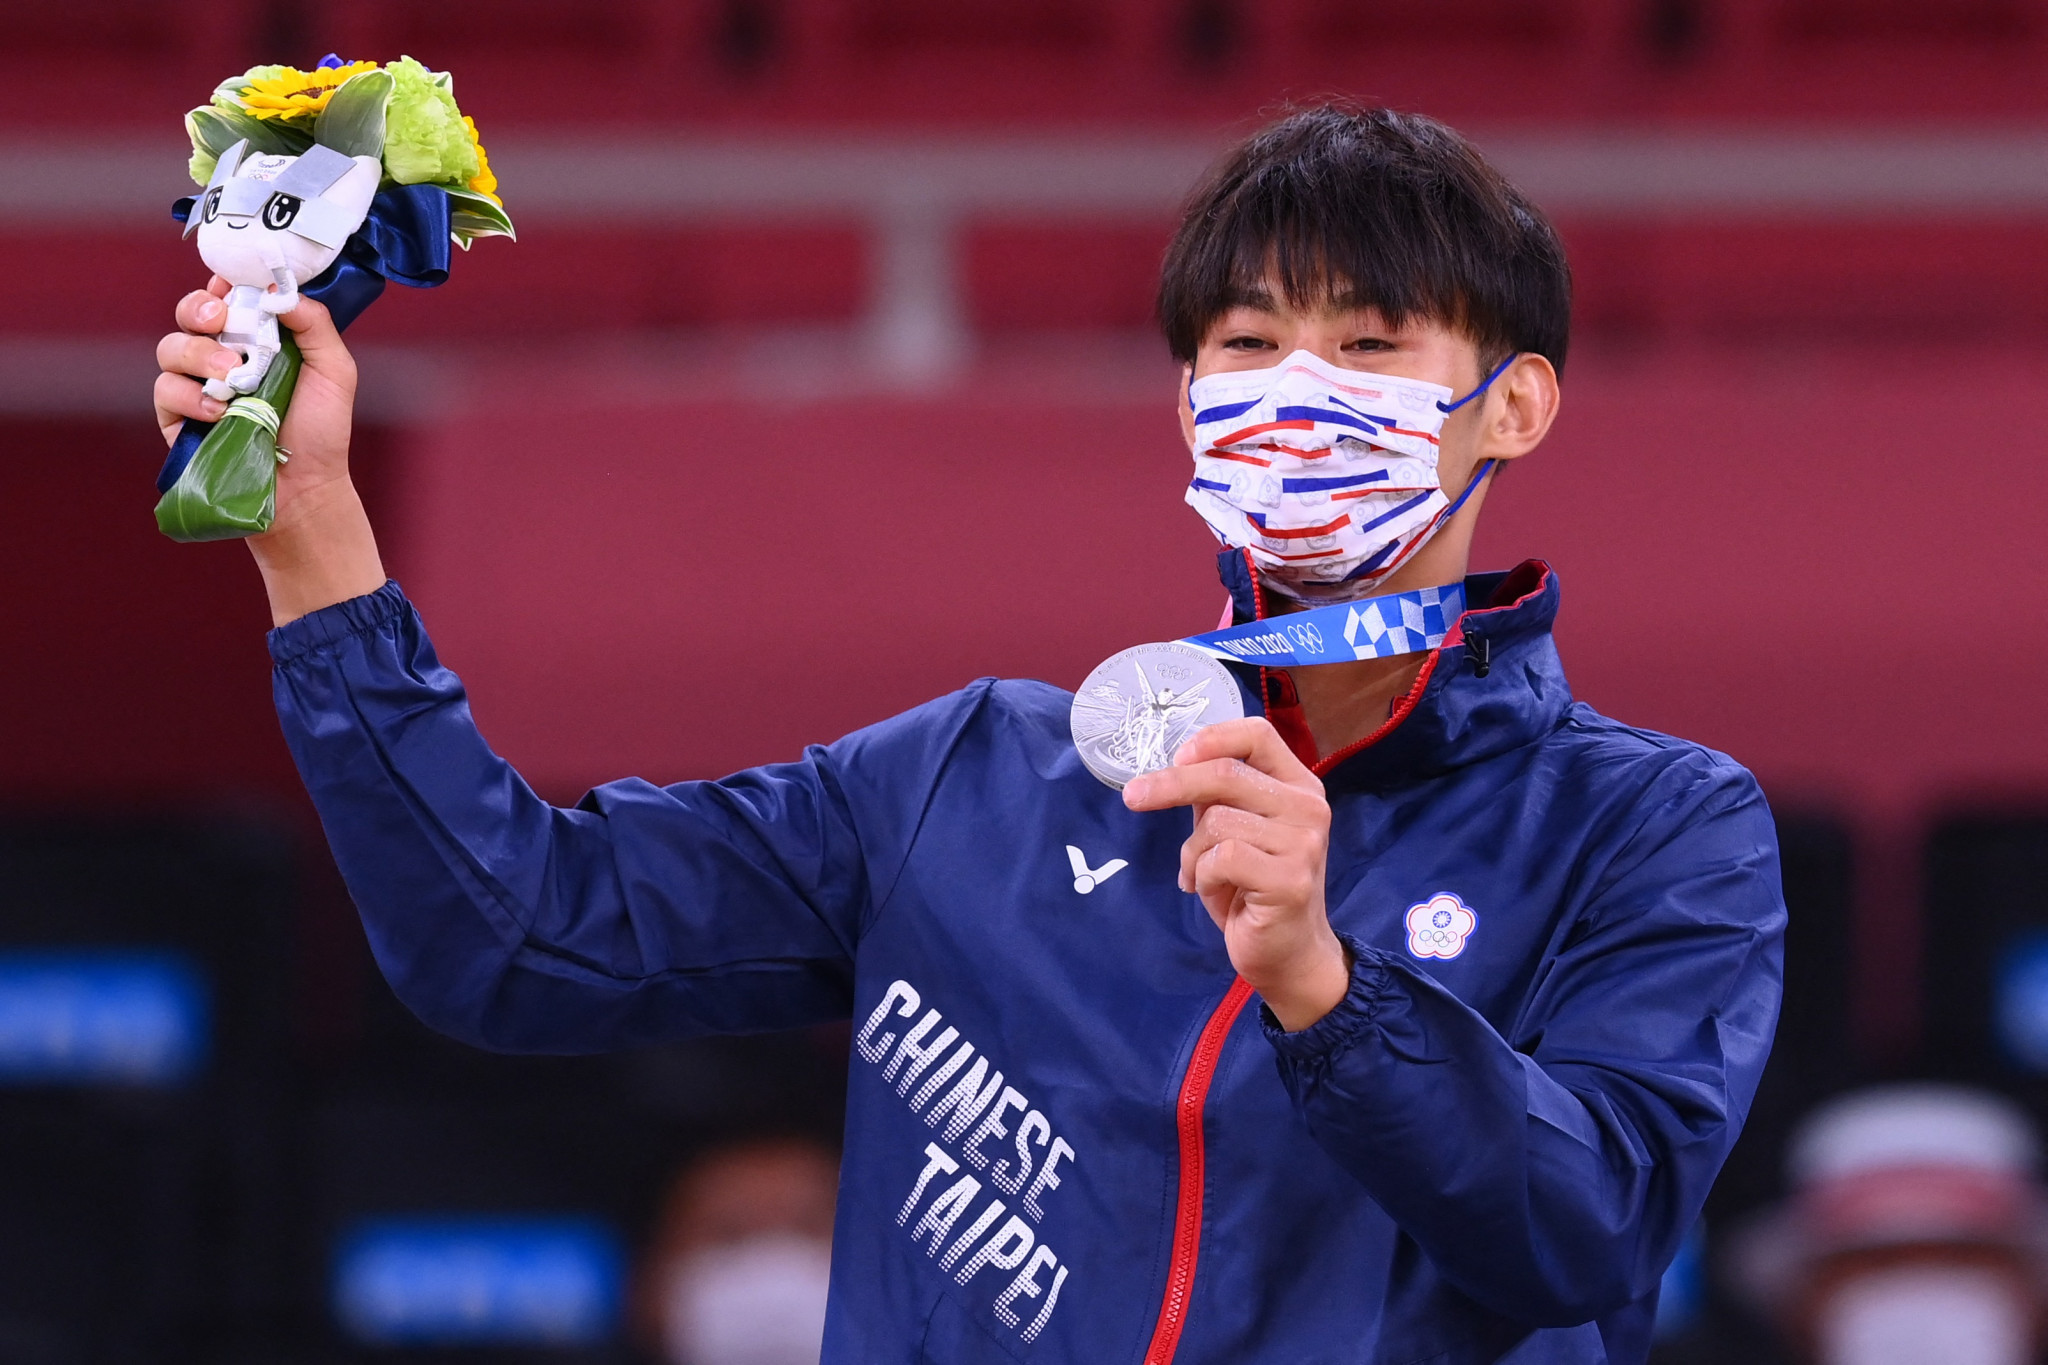 Yang Yung-wei, an Olympic silver medallist at Tokyo 2020, is set to represent Chinese Taipei at this year's Summer World University Games in Chengdu ©Getty Images 